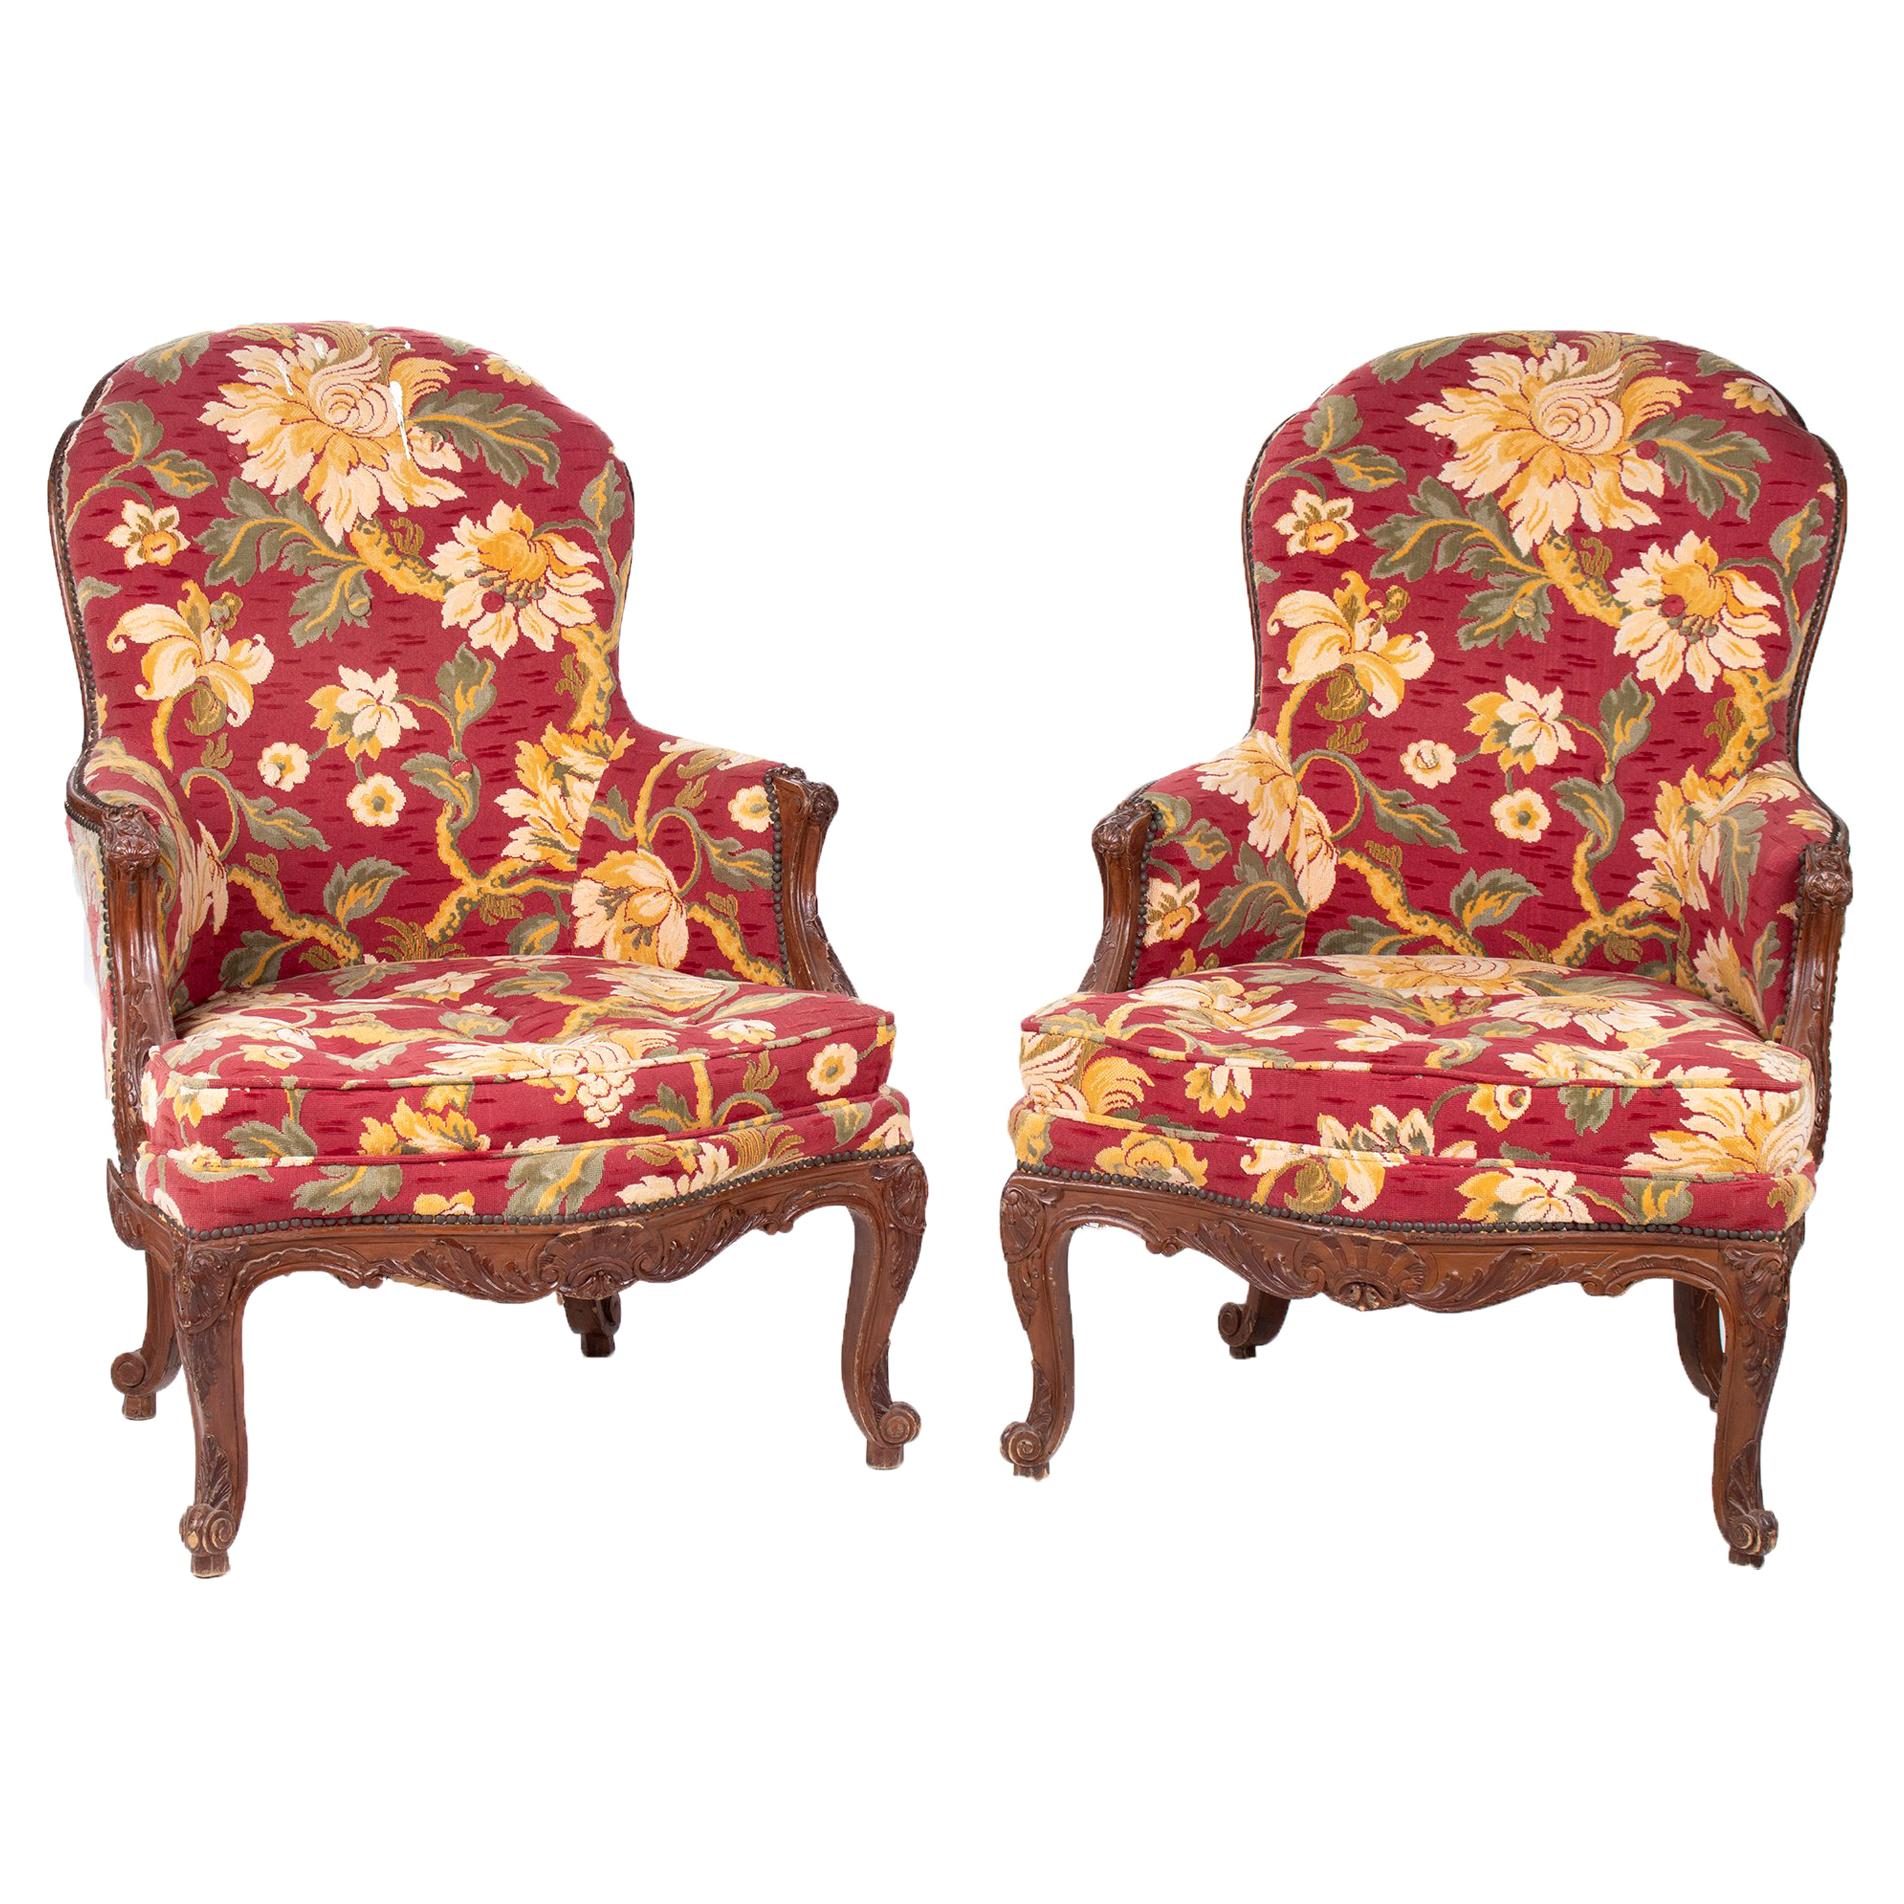 19th Century Pair of French Floral Upholstered Chairs For Sale